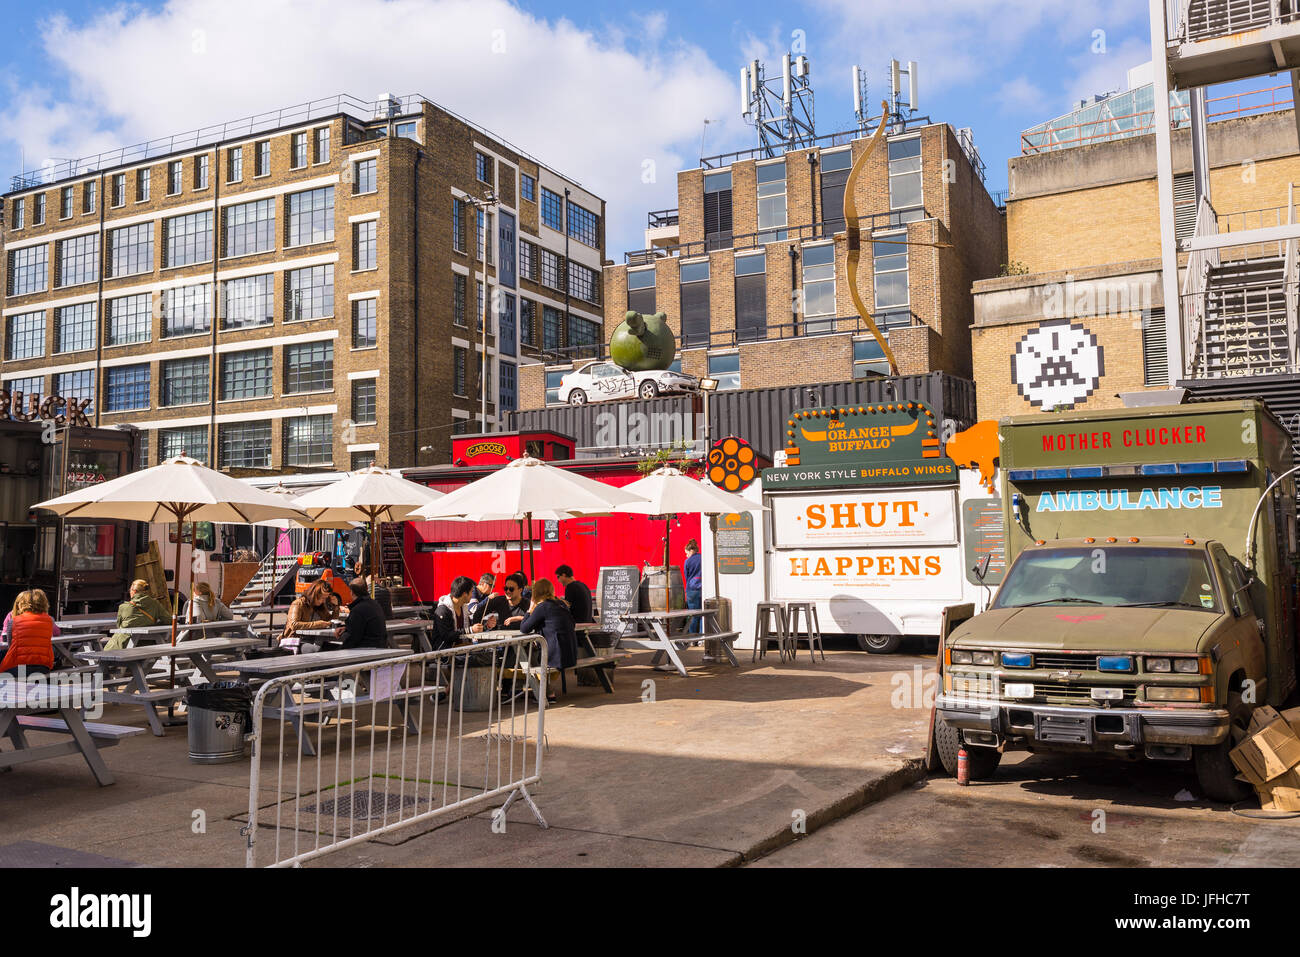 Pop up outdoor restaurants with people eating outiside at The Old Truman Brewery, Ely's Yard, Shoreditch, London, UK Stock Photo